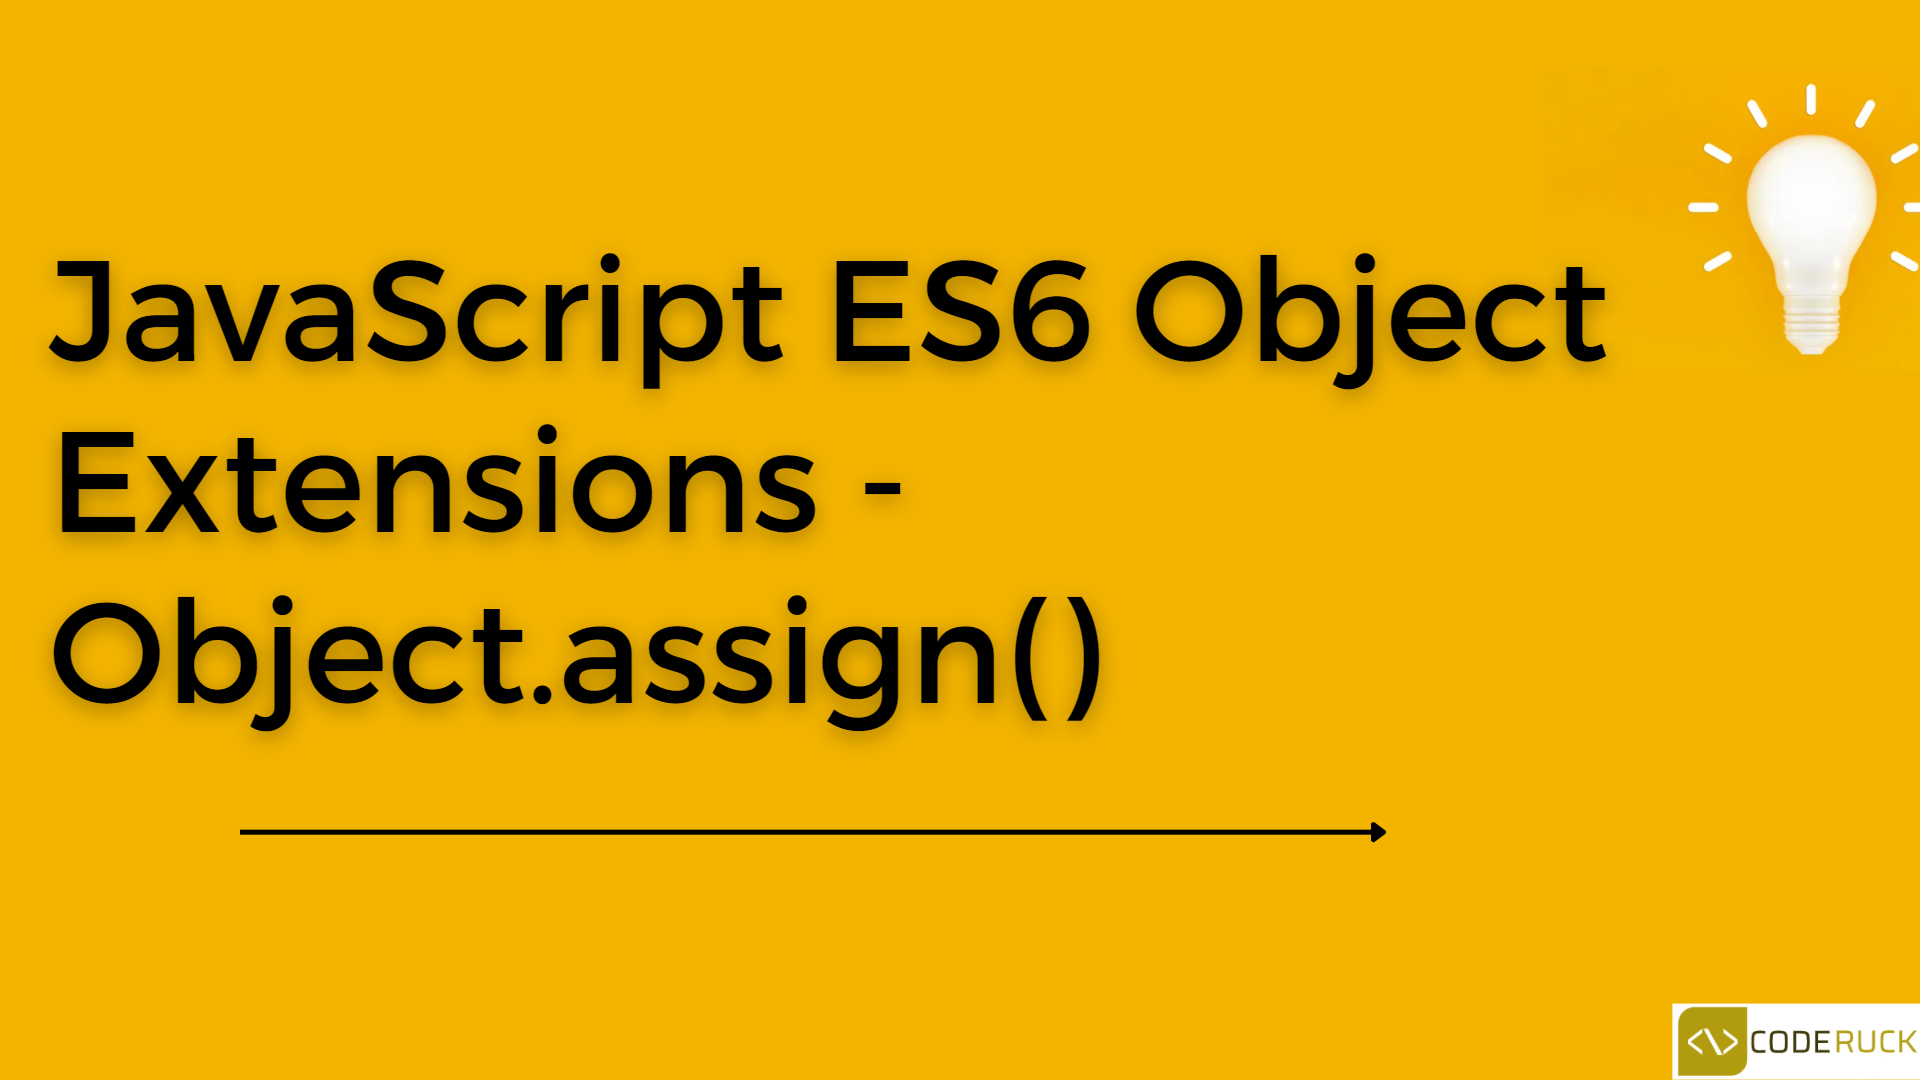 JavaScript ES6 Object Extensions - Object.assign()